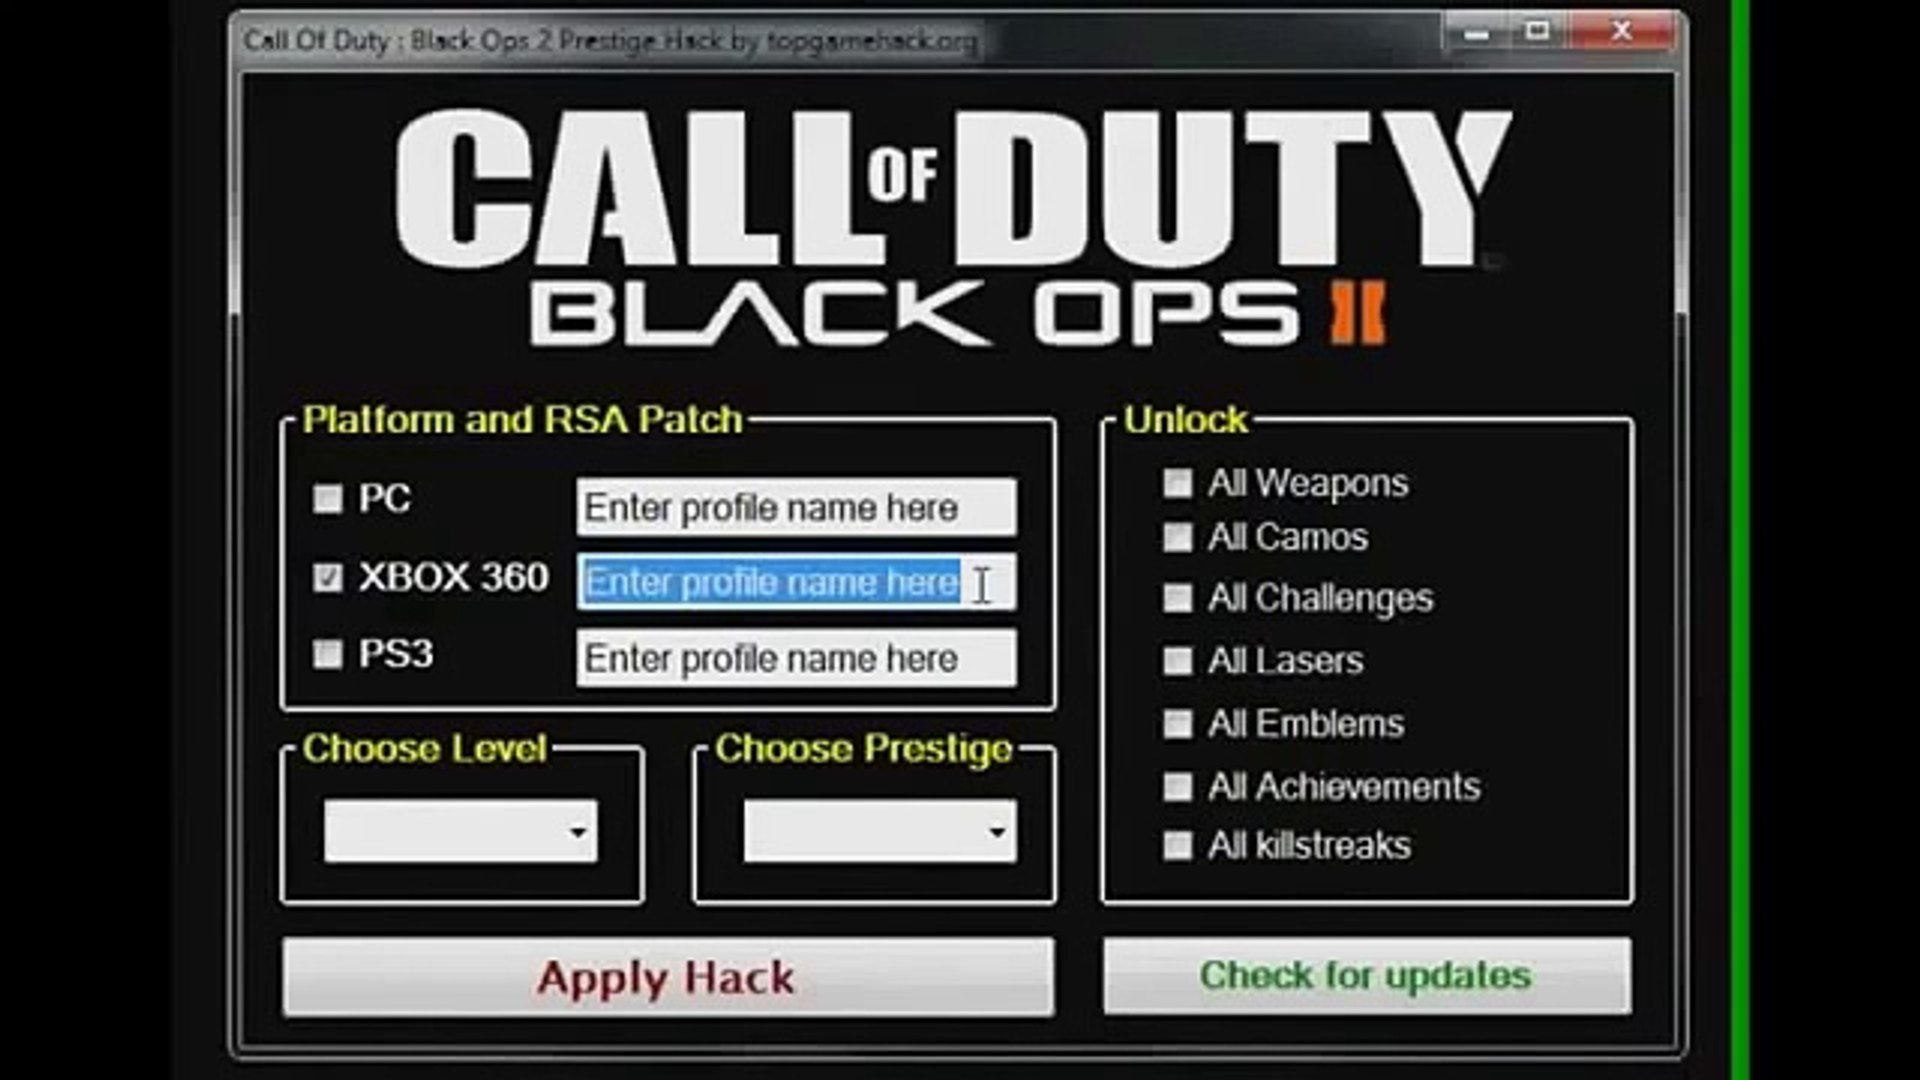 Call of Duty Black Ops 2 Prestige Hack XBOX 360, PC, PS3 - video Dailymotion